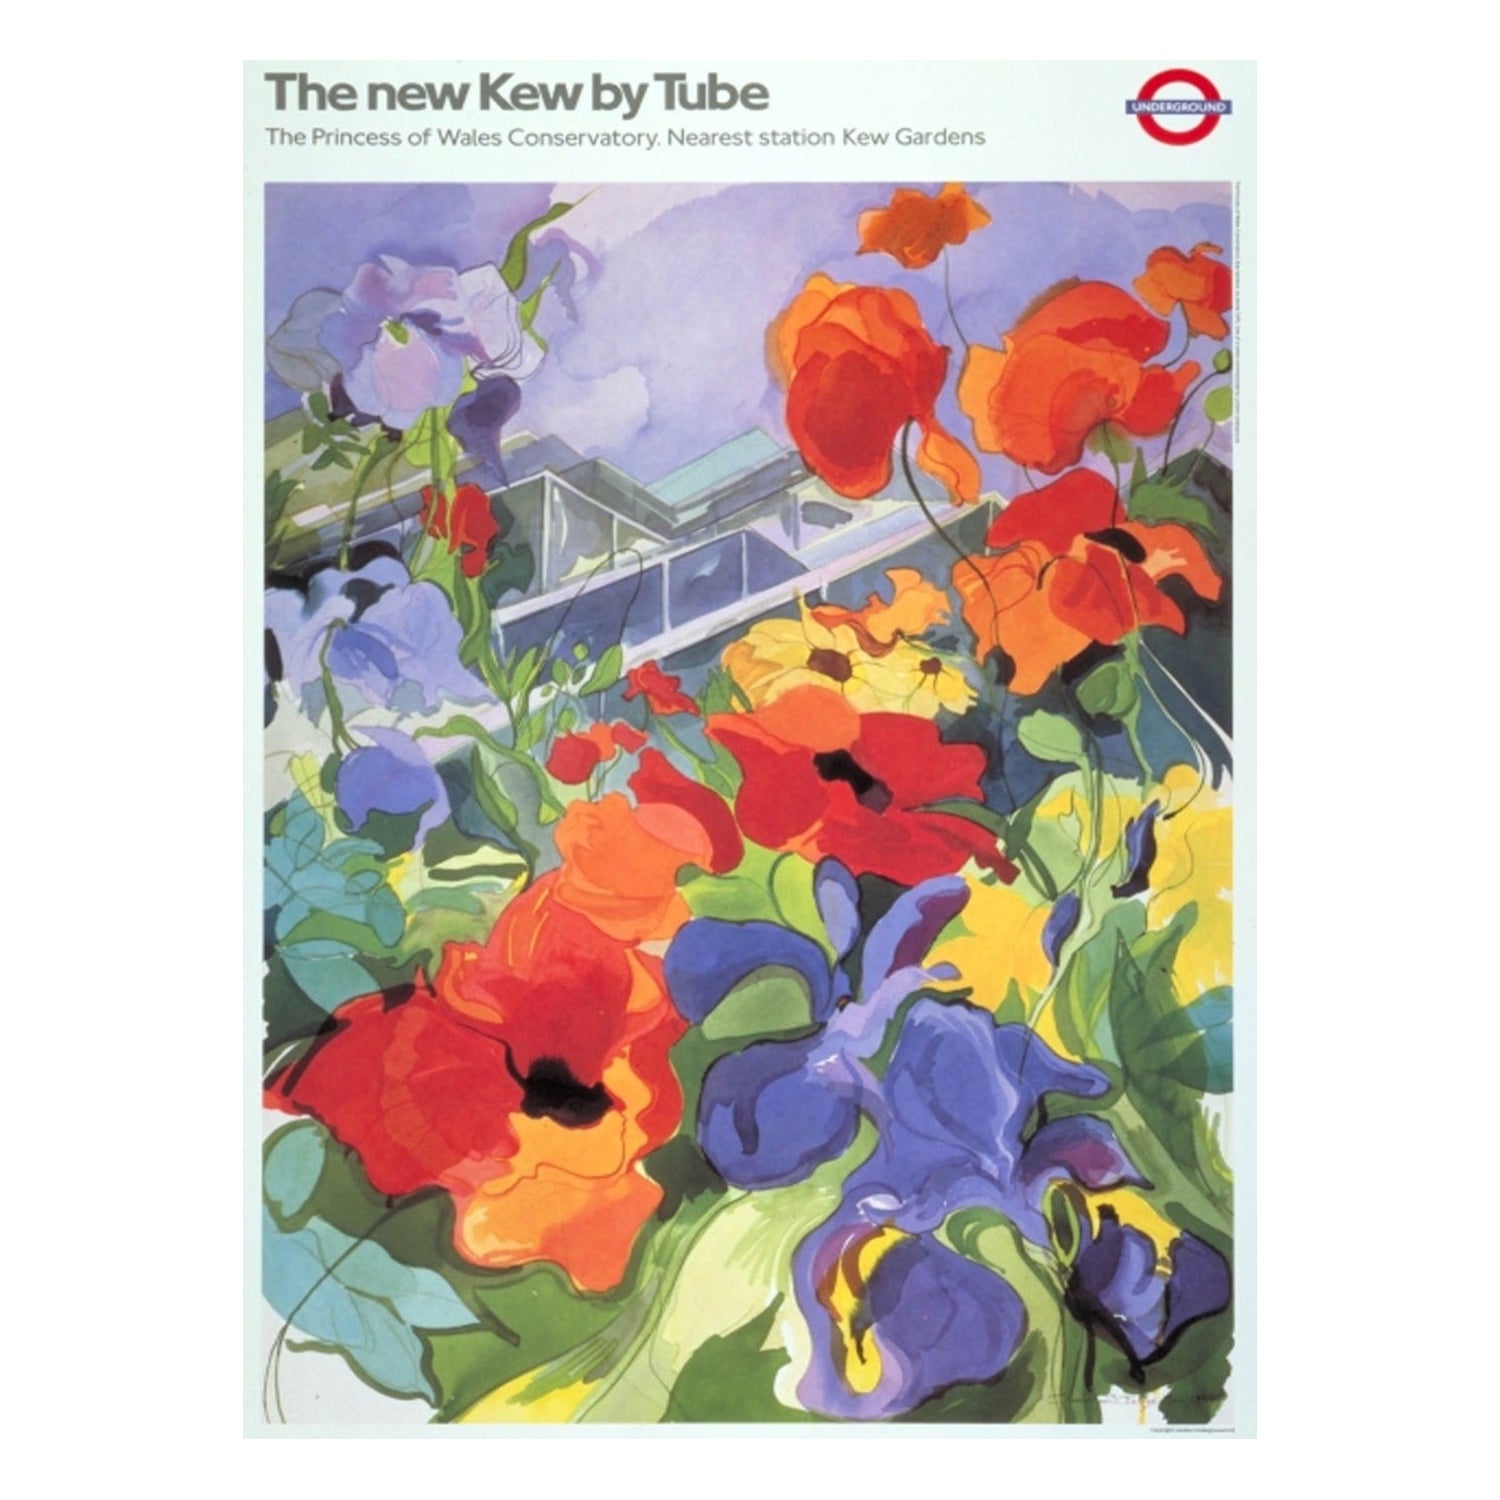 1987 TFL - The New Kew by Tube Original Vintage Poster For Sale